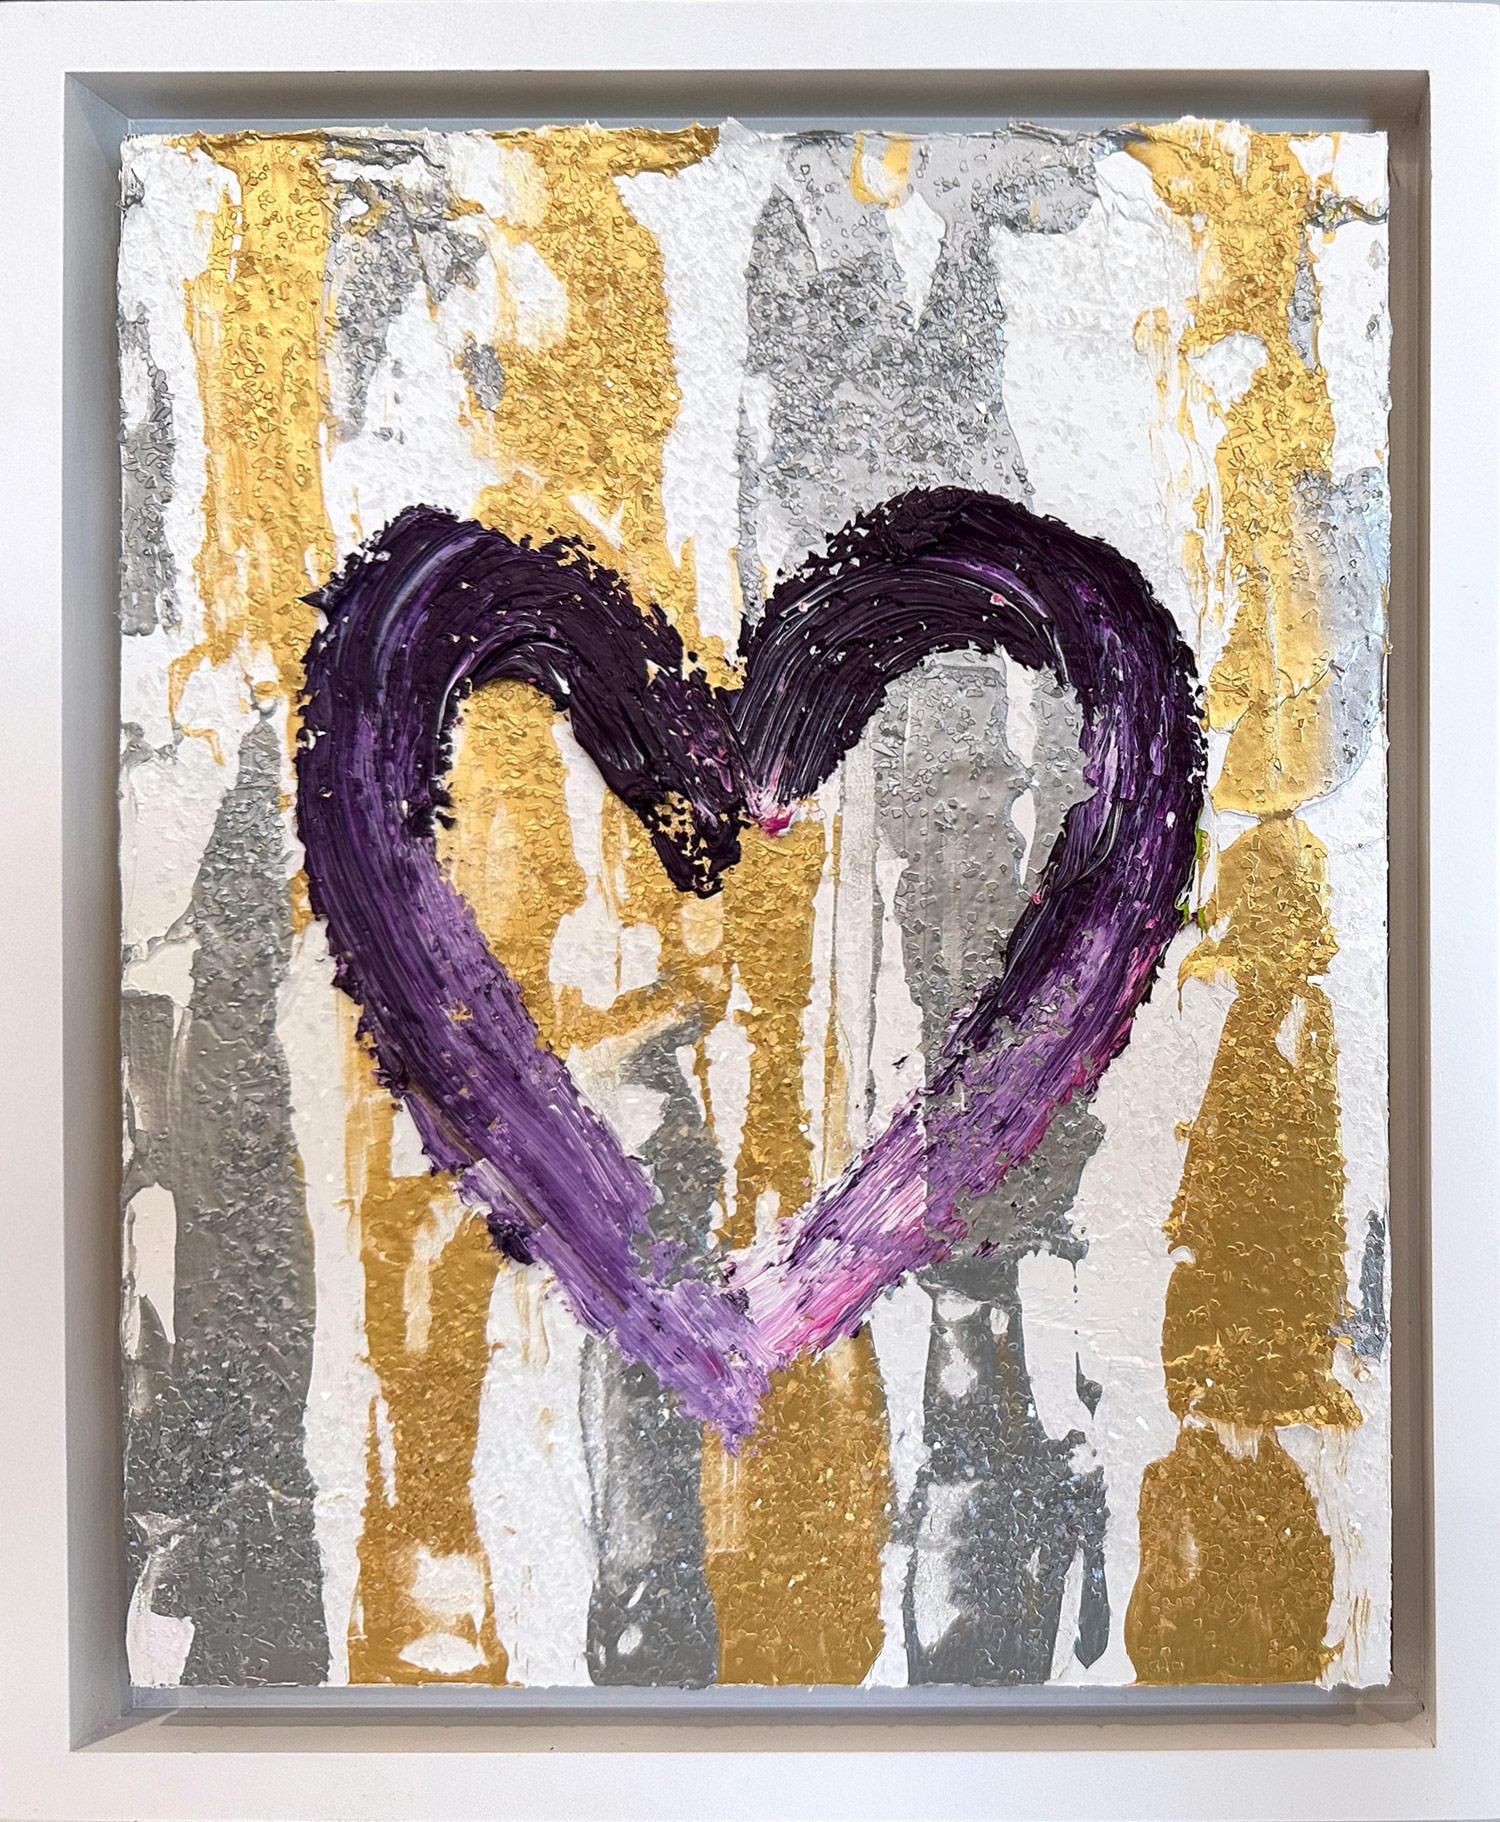 Cindy Shaoul Figurative Painting - "My Bergdorf Goodman Heart" Pop Art Oil Painting with White Floater Frame